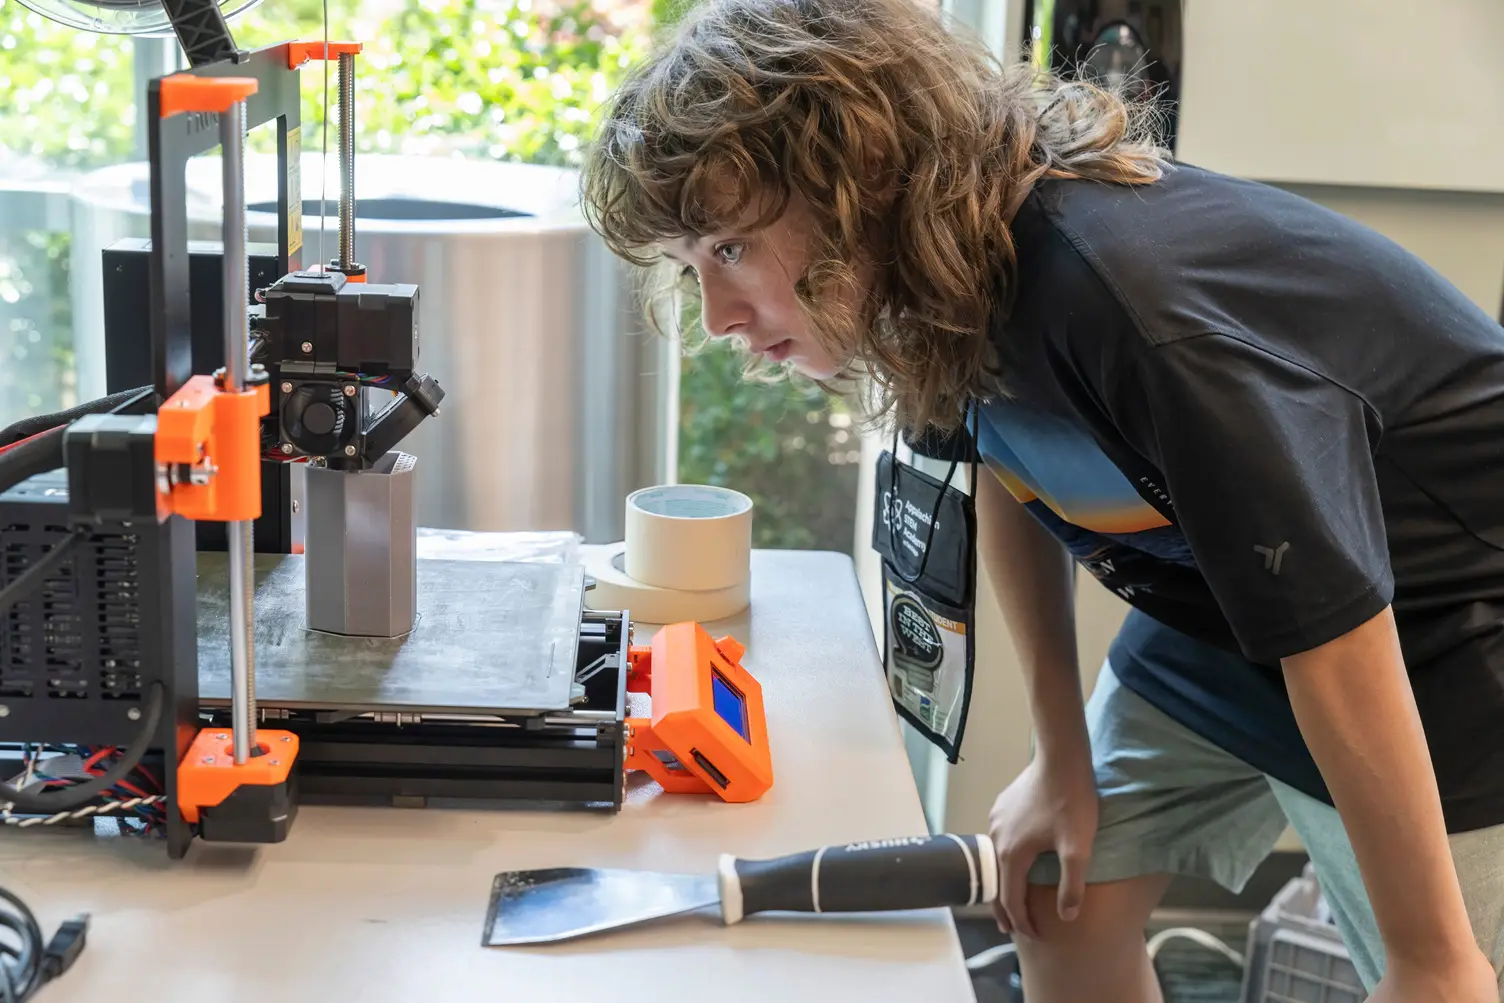 Young students learn about 3D printing from their teacher